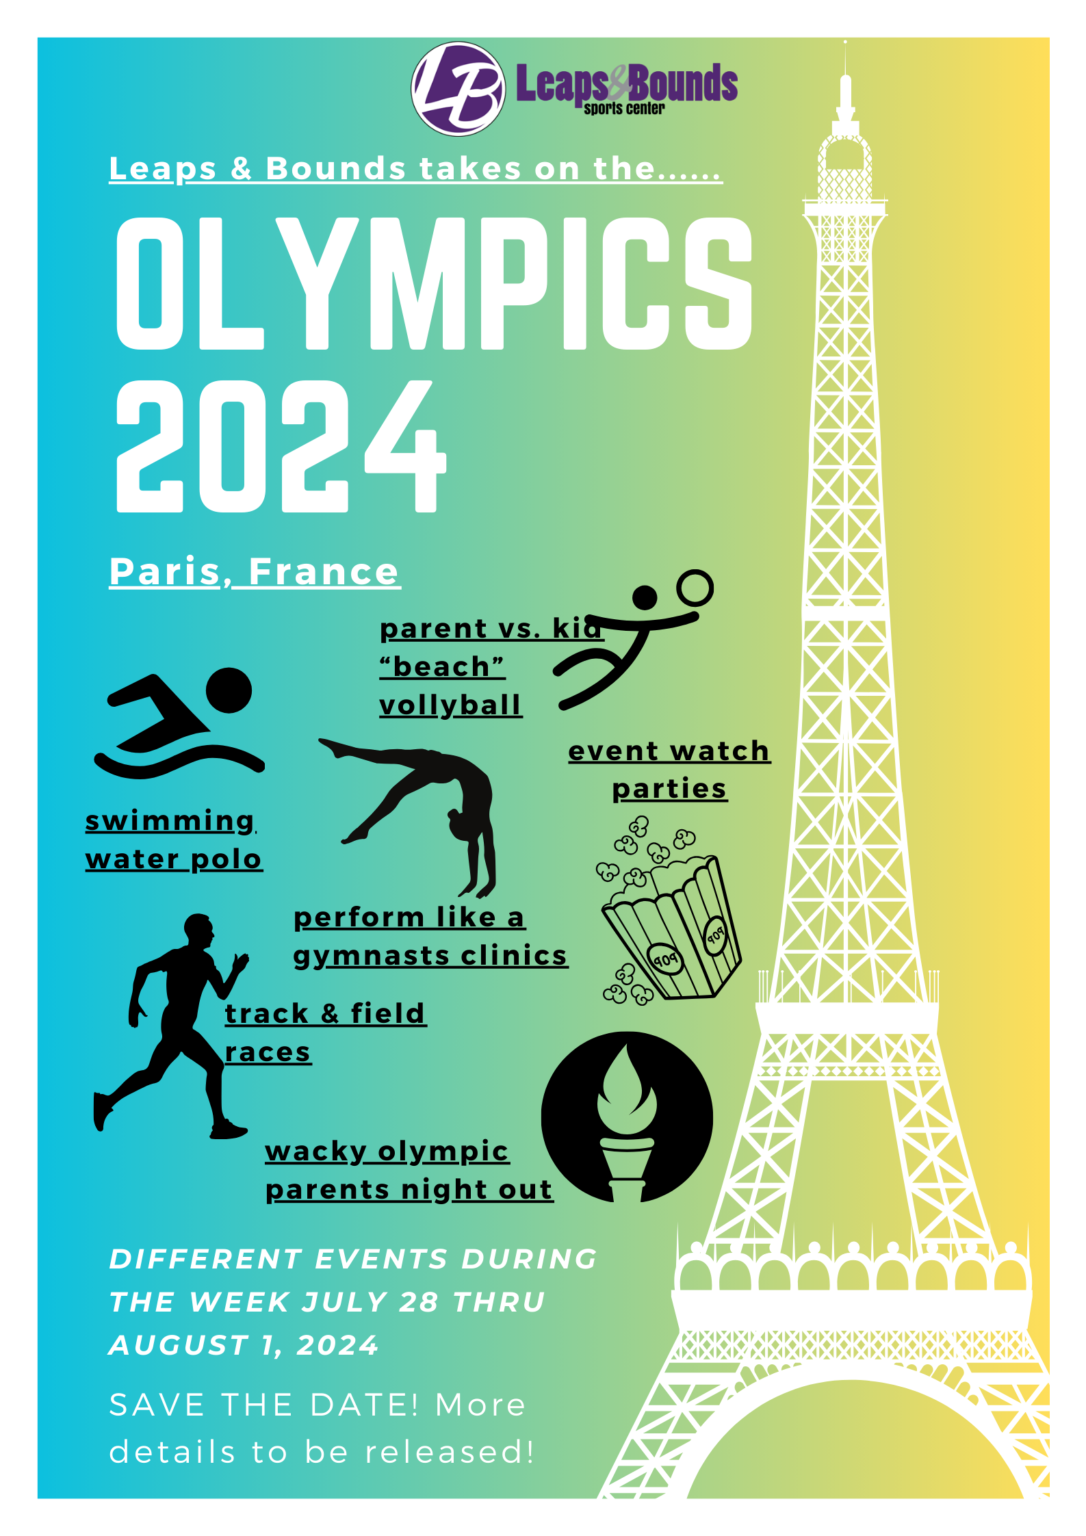 Colorful Olympics-themed flyer featuring the Eiffel Tower on a light purple background. The text lists activities including parent vs. kid "beach" volleyball, swimming water polo, gymnastics clinics, track & field races, event watch parties, and a wacky Olympic parents night out. Event dates: July 28 to August 7, 2024. Save the date! More details to be released for